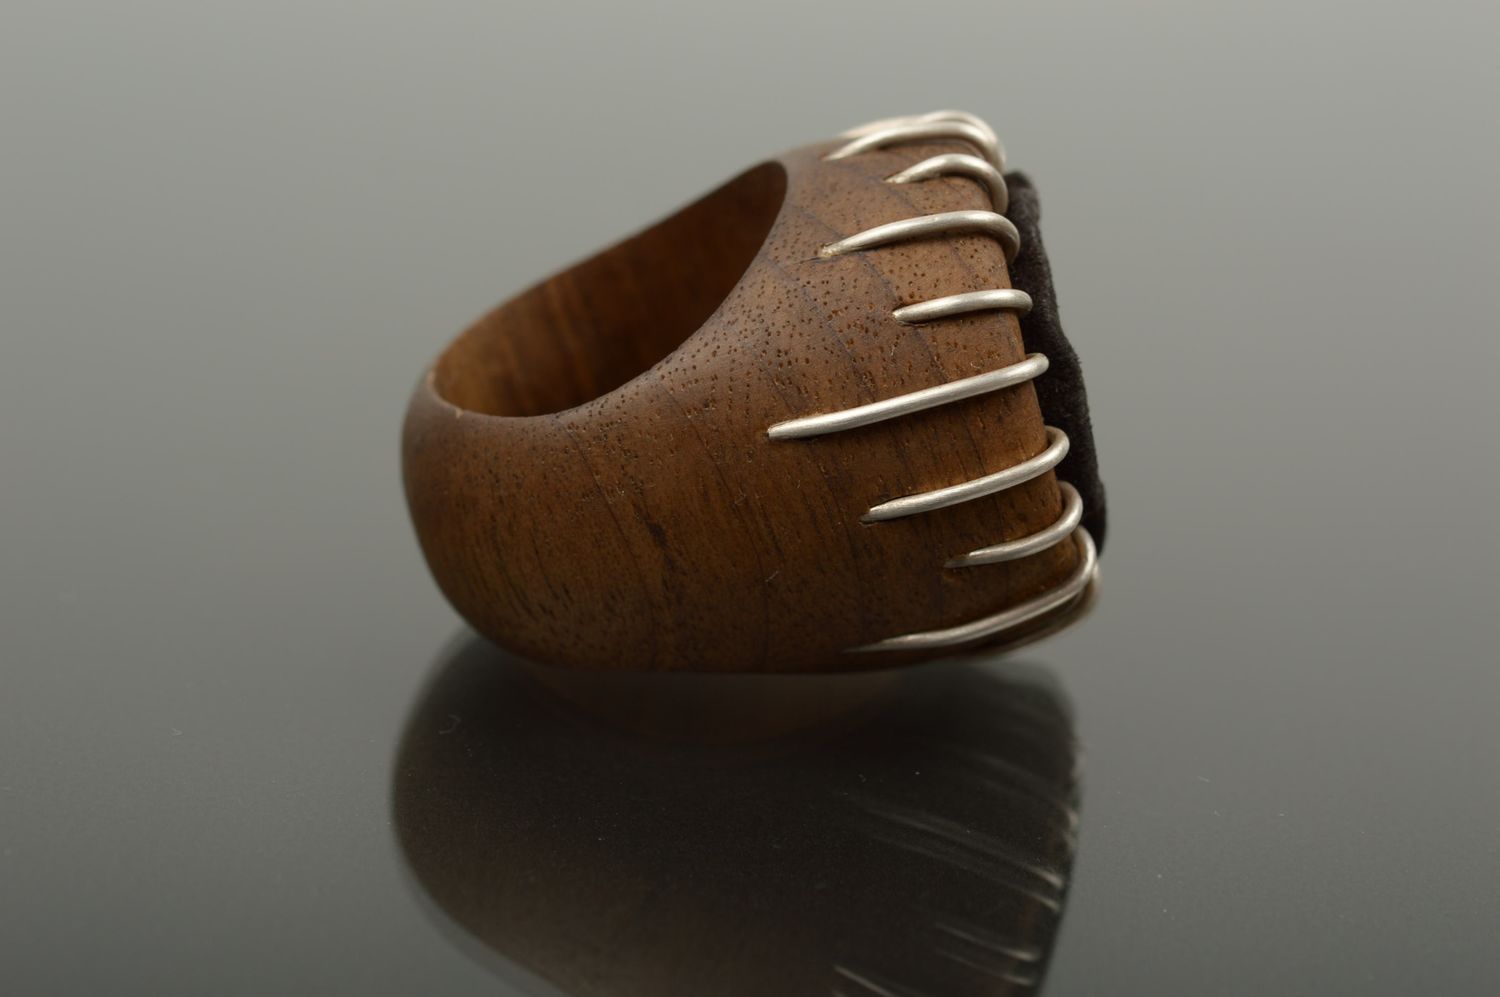 Handmade jewelry designer accessory unusual ring wooden ring gift ideas photo 3